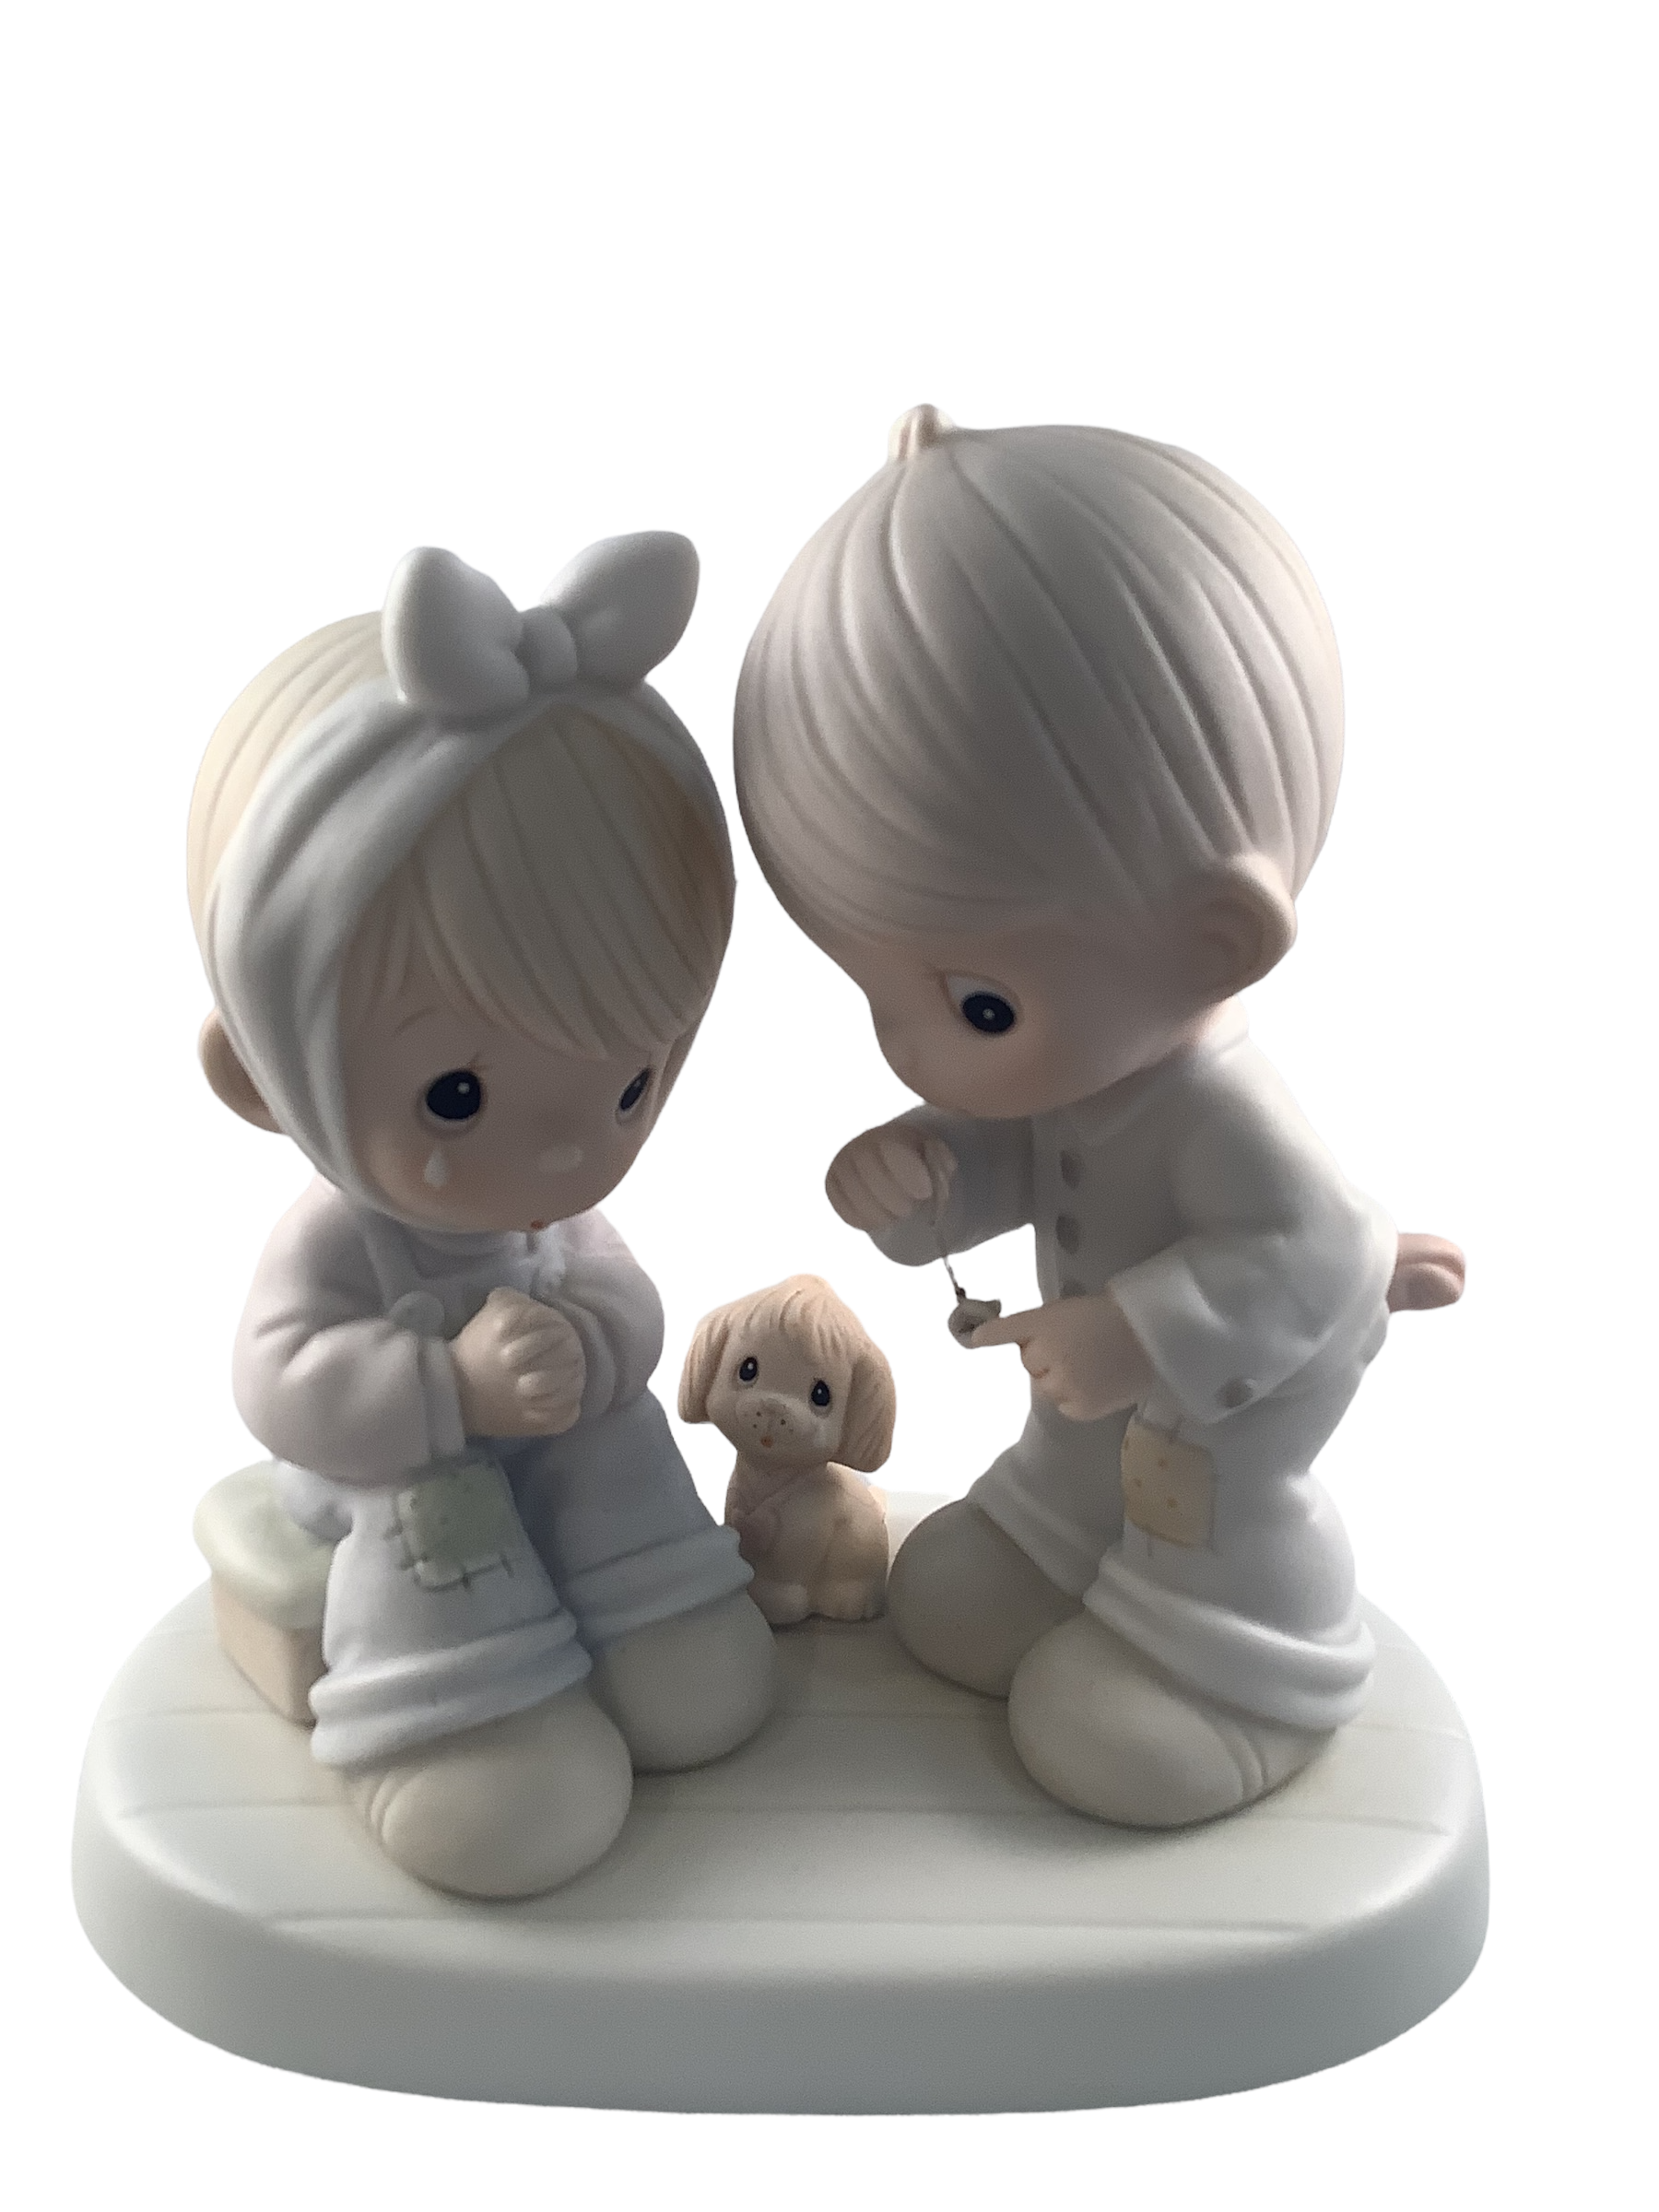 To Tell The Tooth You're Special - Precious Moment Figurine